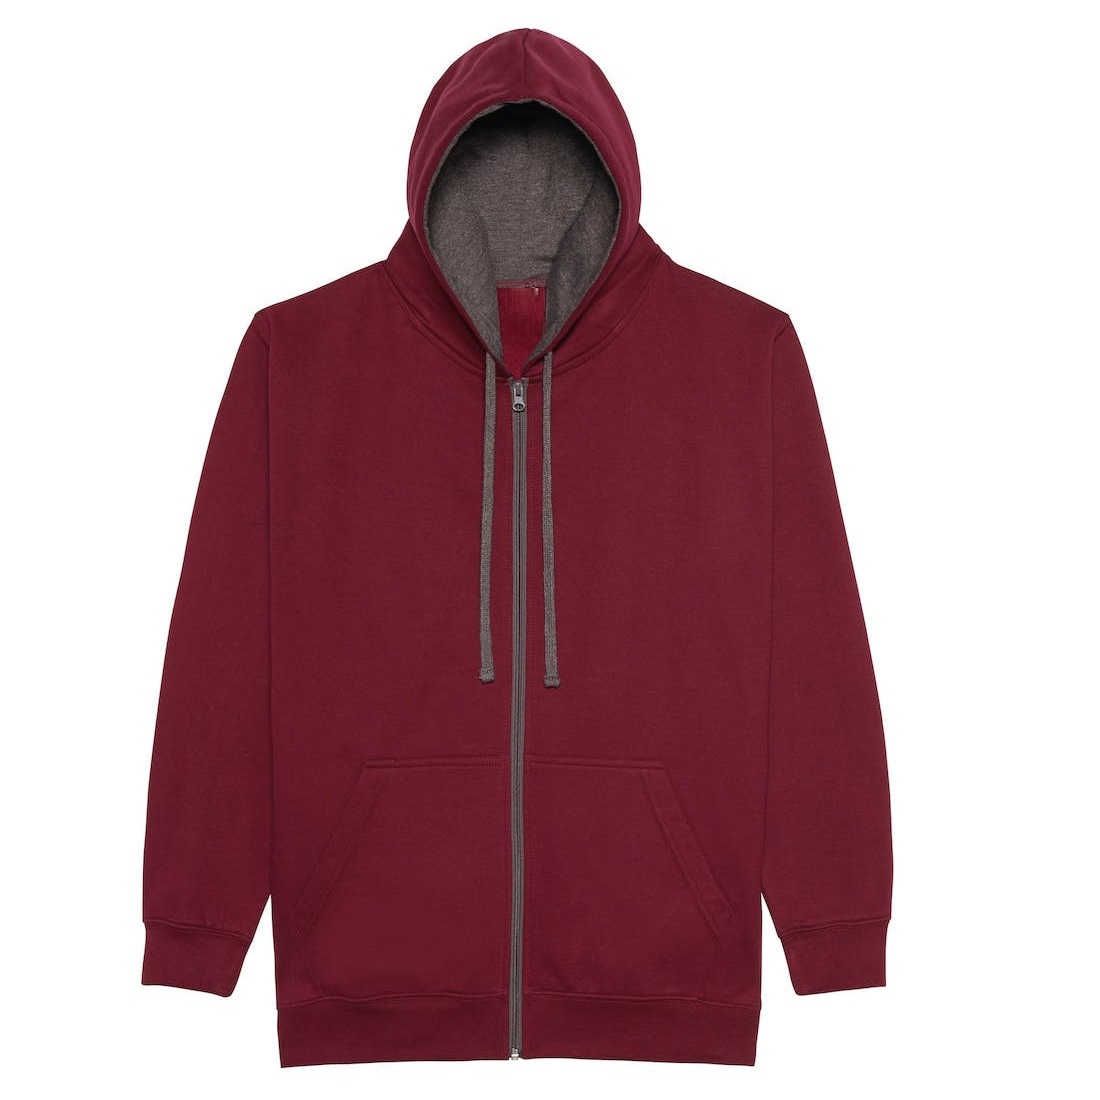 Printed Contrasting Zoodies Burgundy/Charcoal